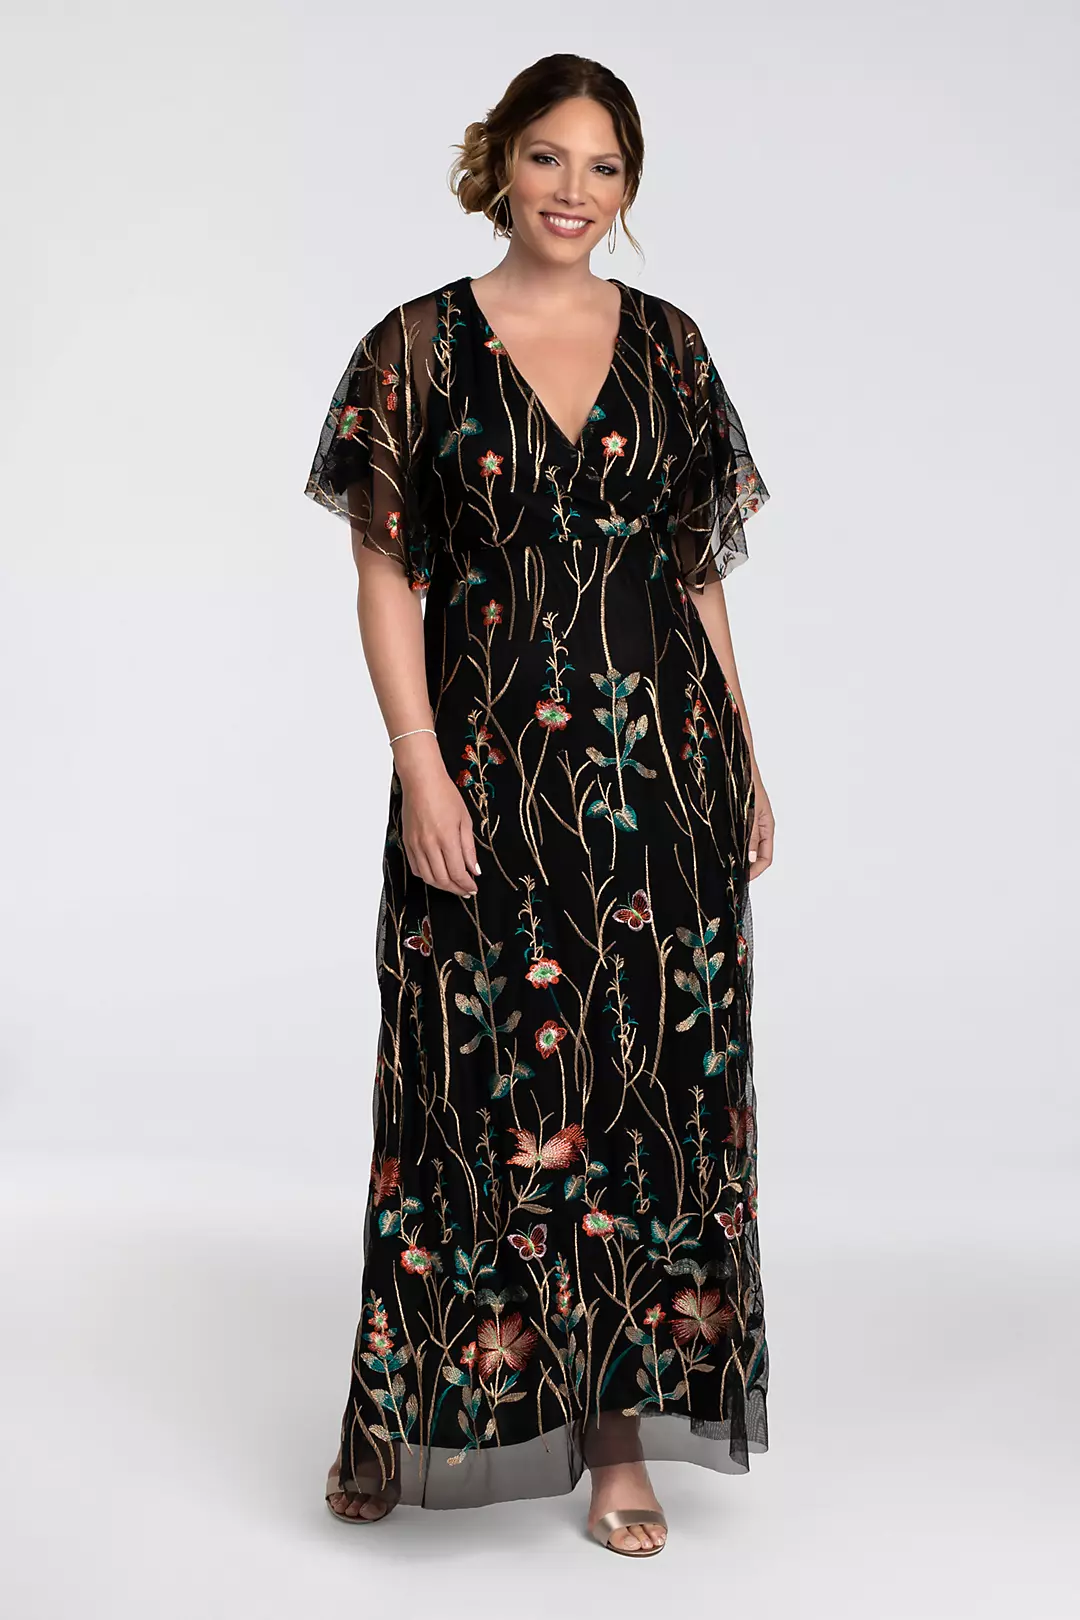 Embroidered Elegance Plus Size Floral Evening Gown Image